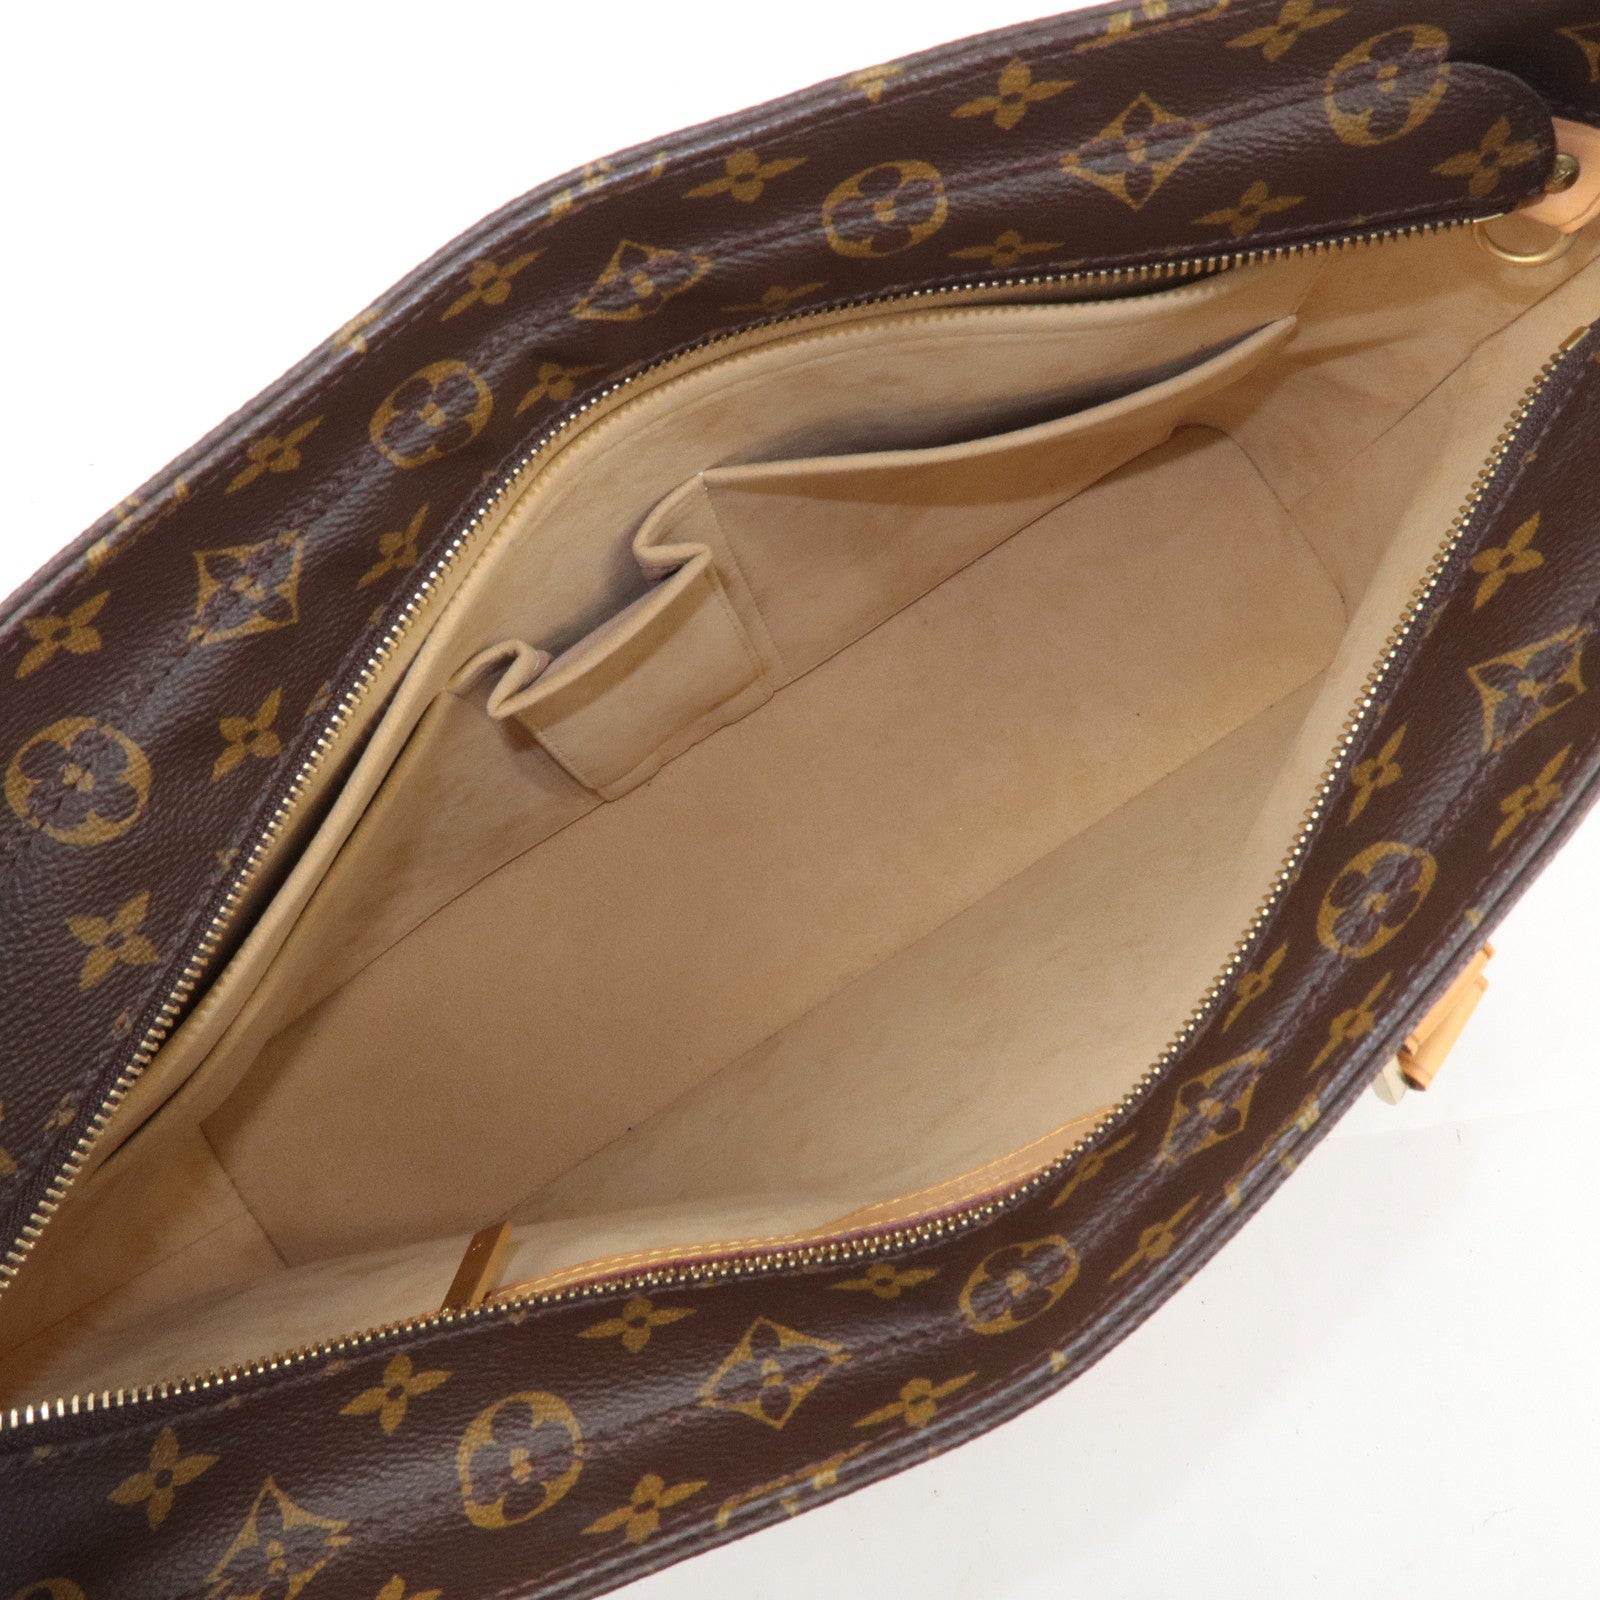 Authentic Louis Vuitton Monogram Luco Tote Bag Hand Bag Brown M51155 Used  F/S